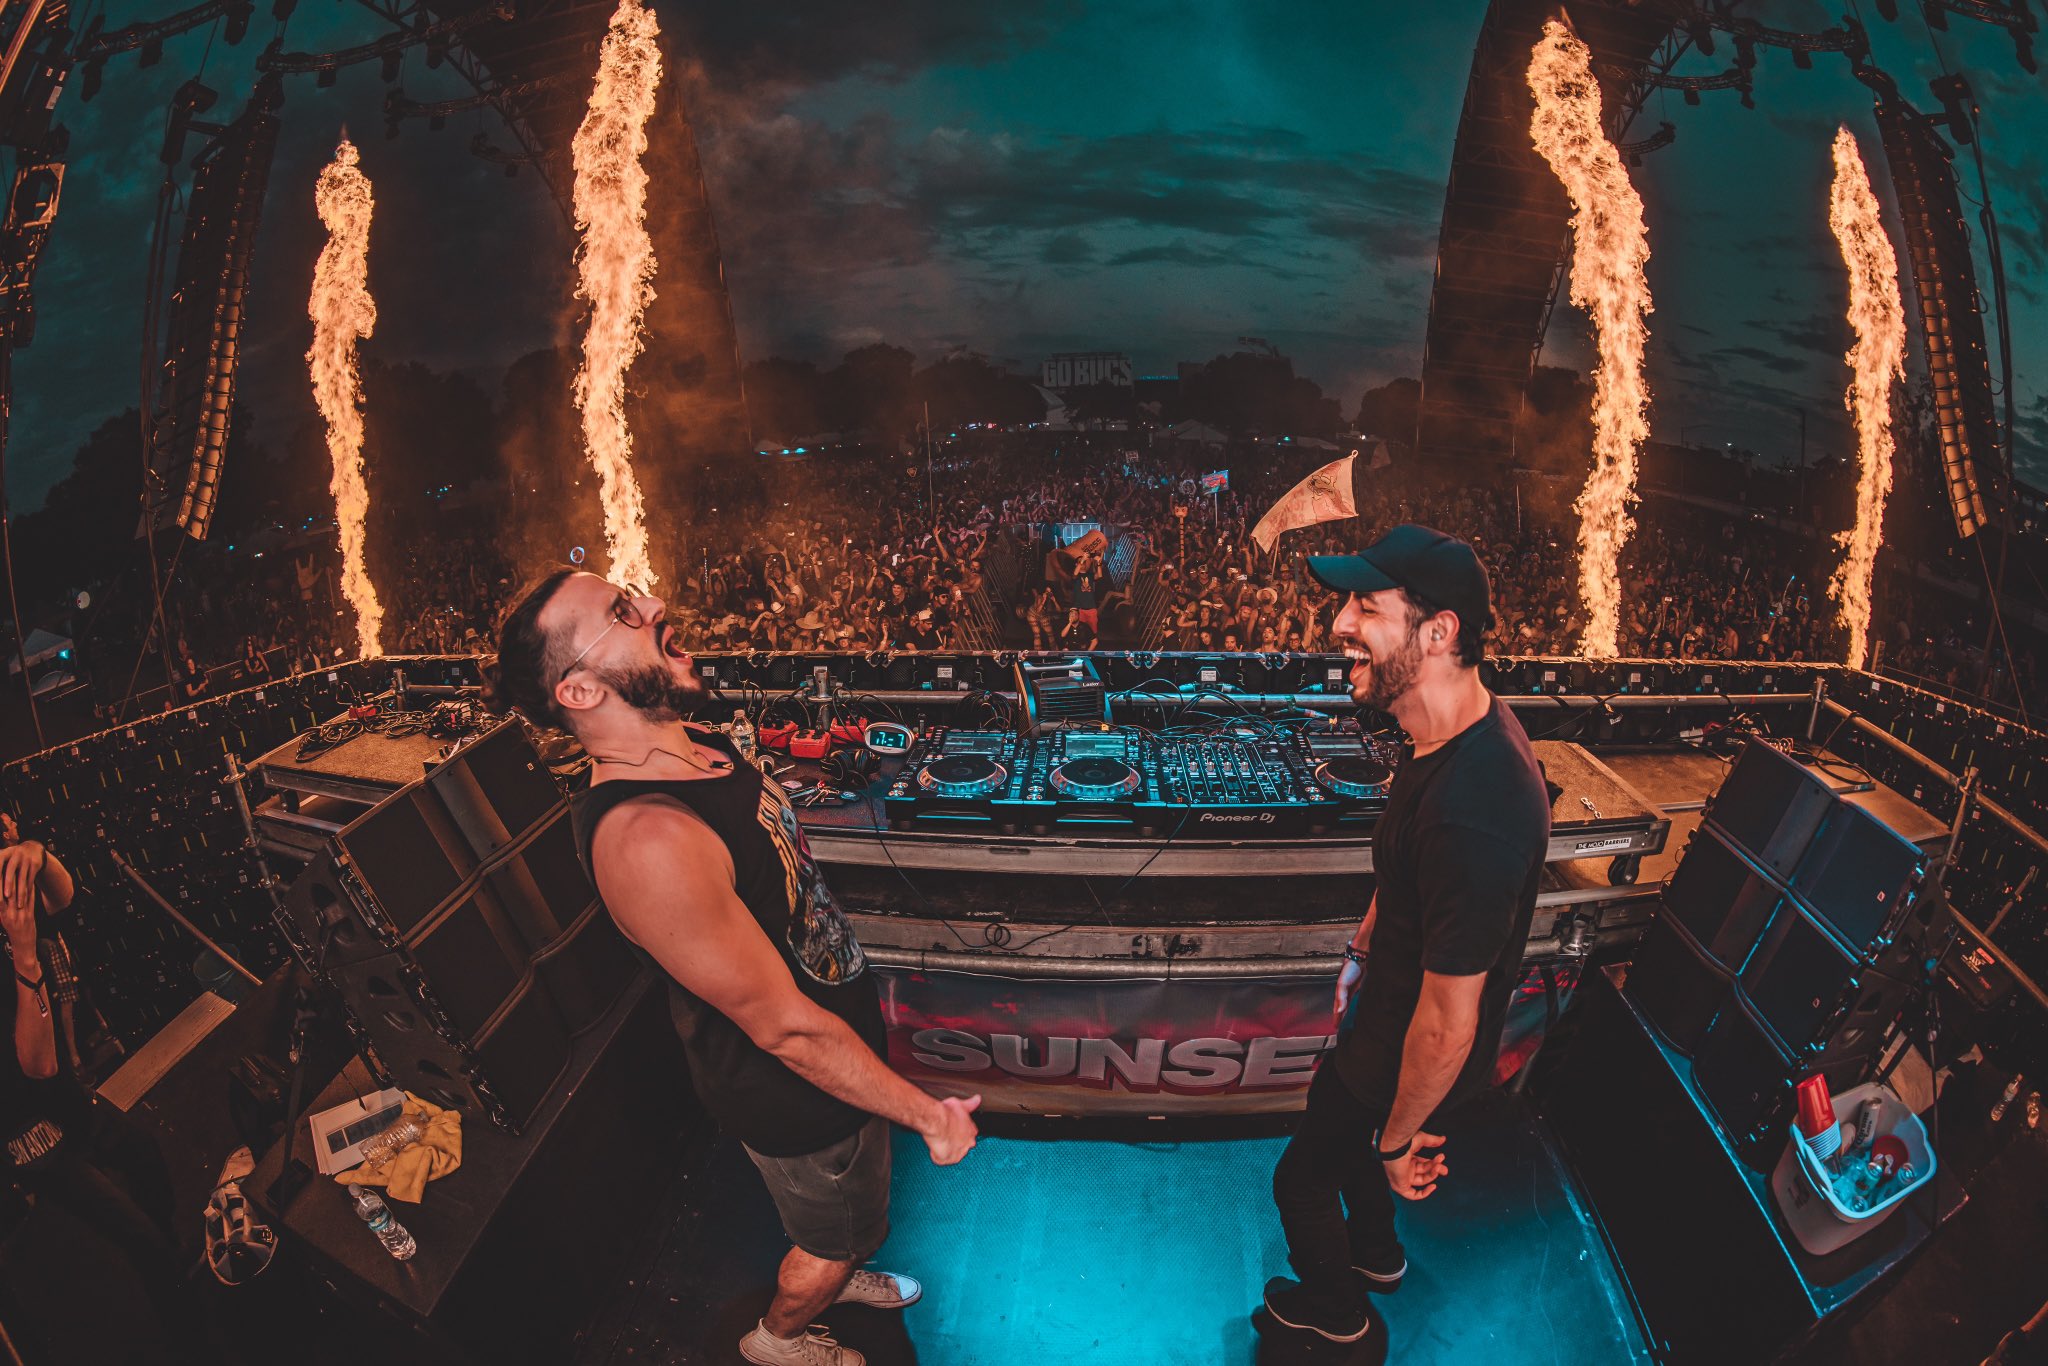 Jason Ross and Trivecta debut collab ID ‘Ashes to Love’ featuring Rbbts